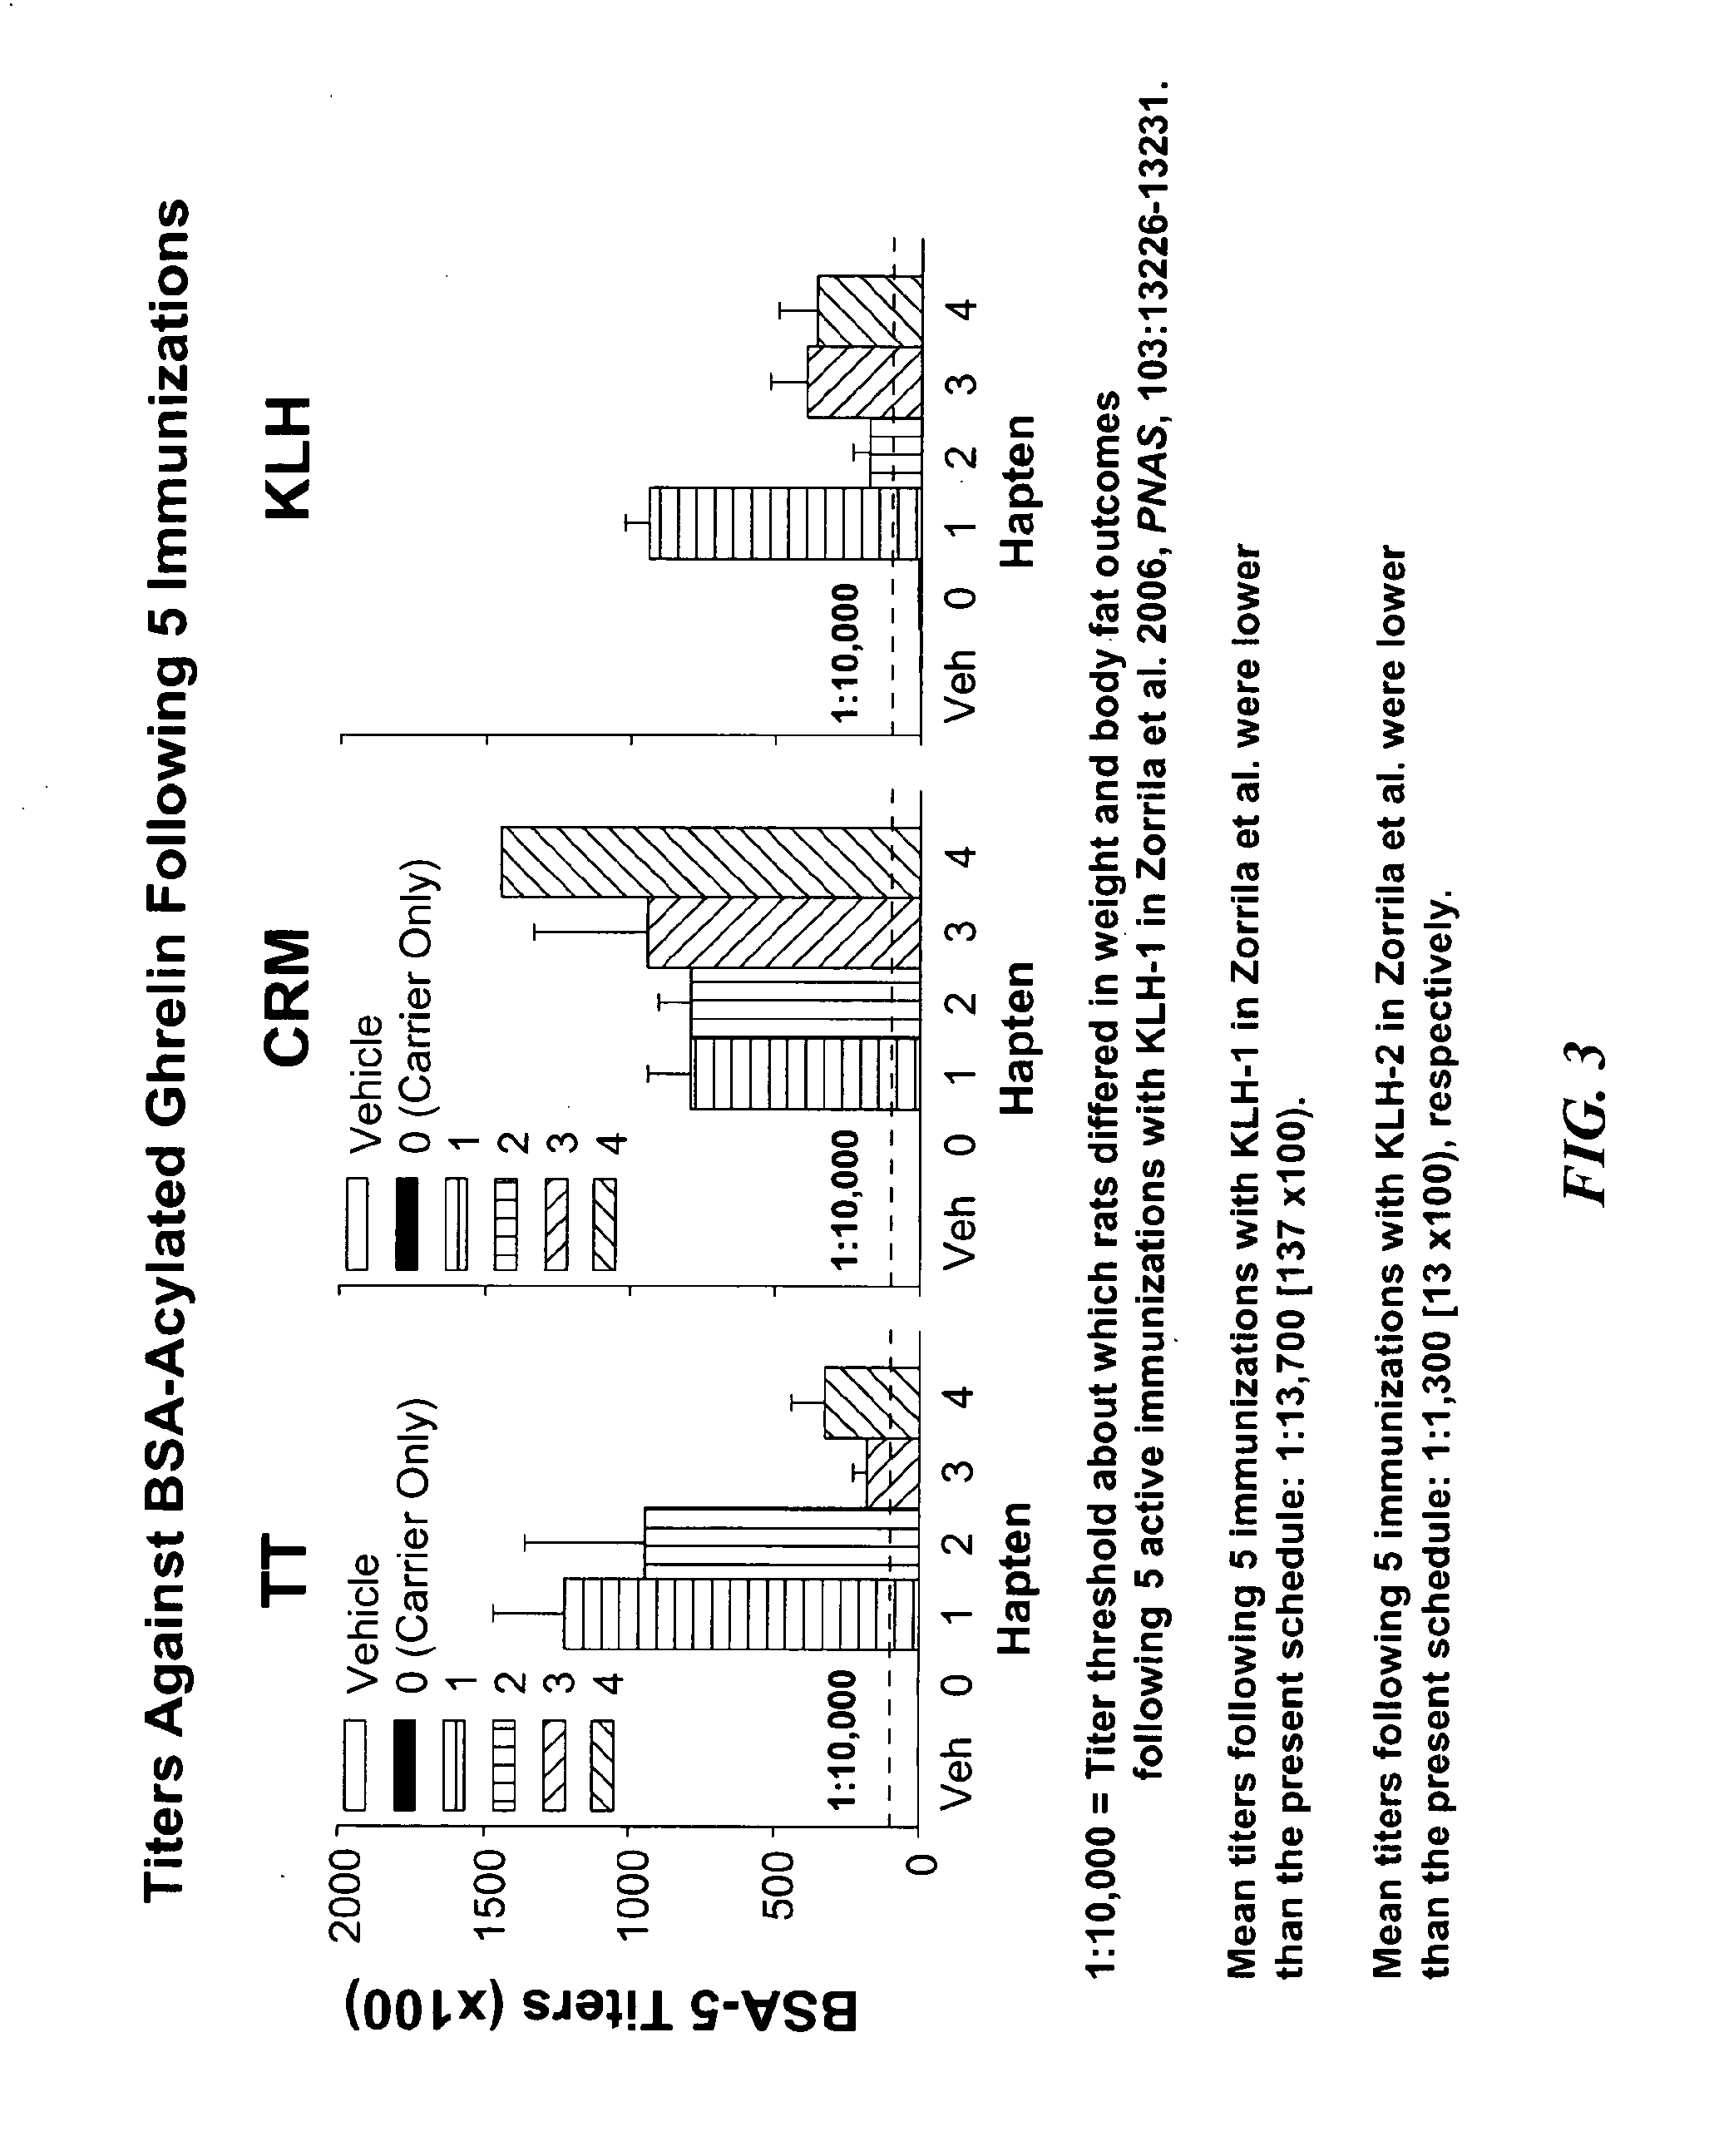 Ghrelin Mimetic Polypeptide Hapten Immunoconjugates Having Improved Solubility and Immunogenicity and Methods of Use Thereof